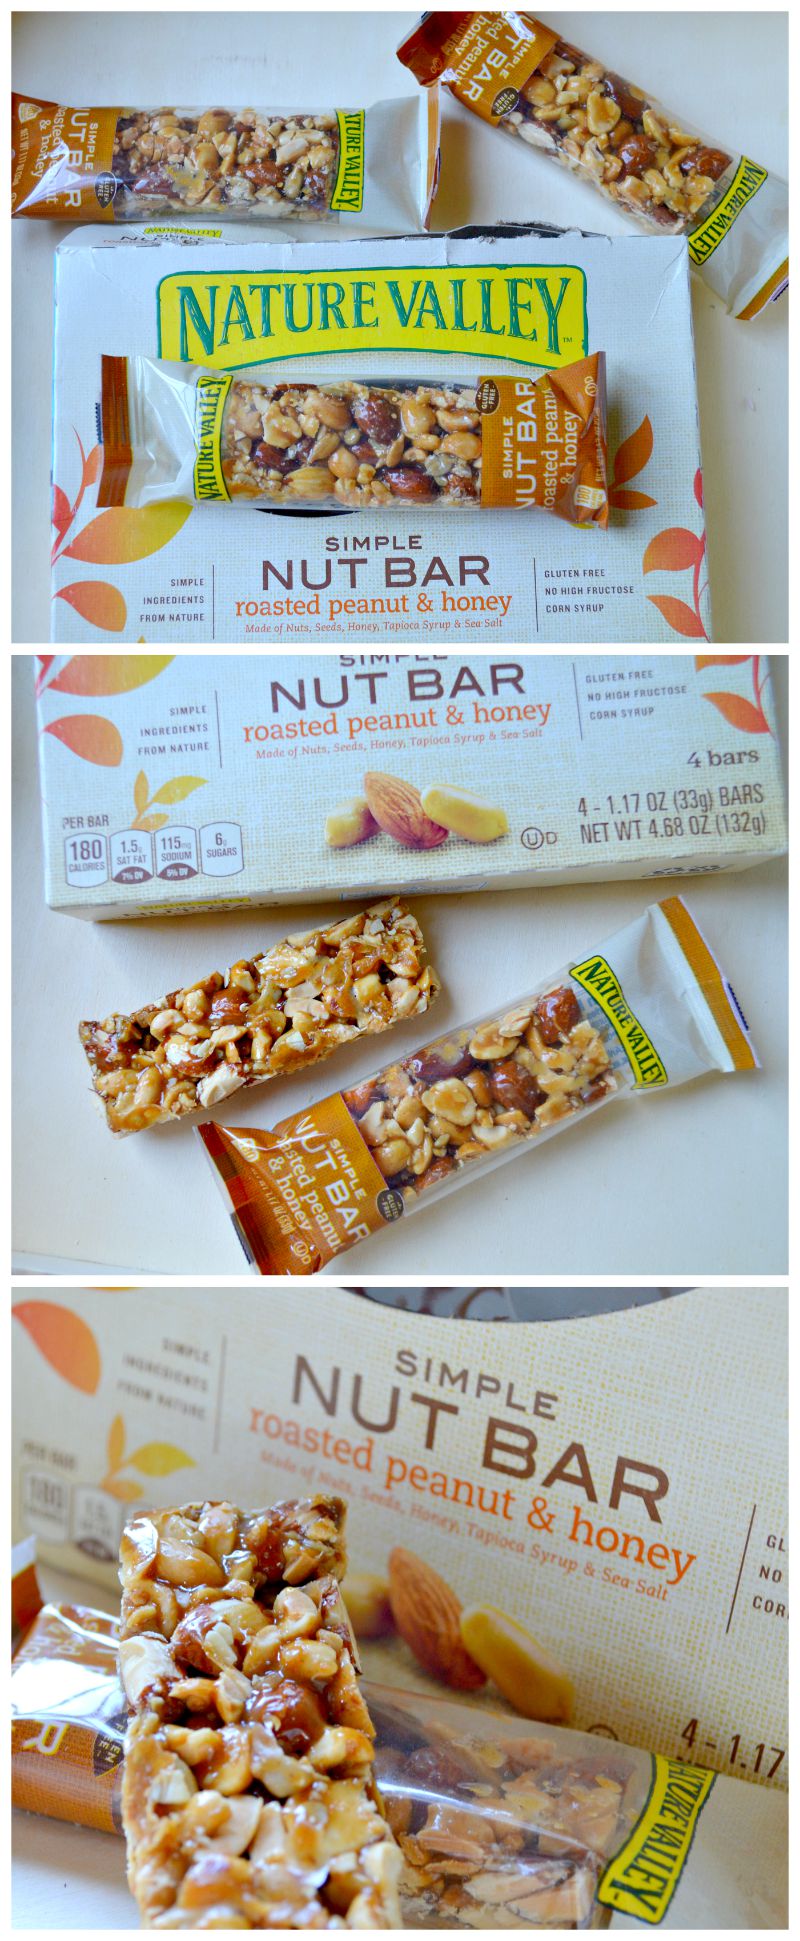 Fuel Up For Your Next Adventure With Nature Valley Simple Nut Bars